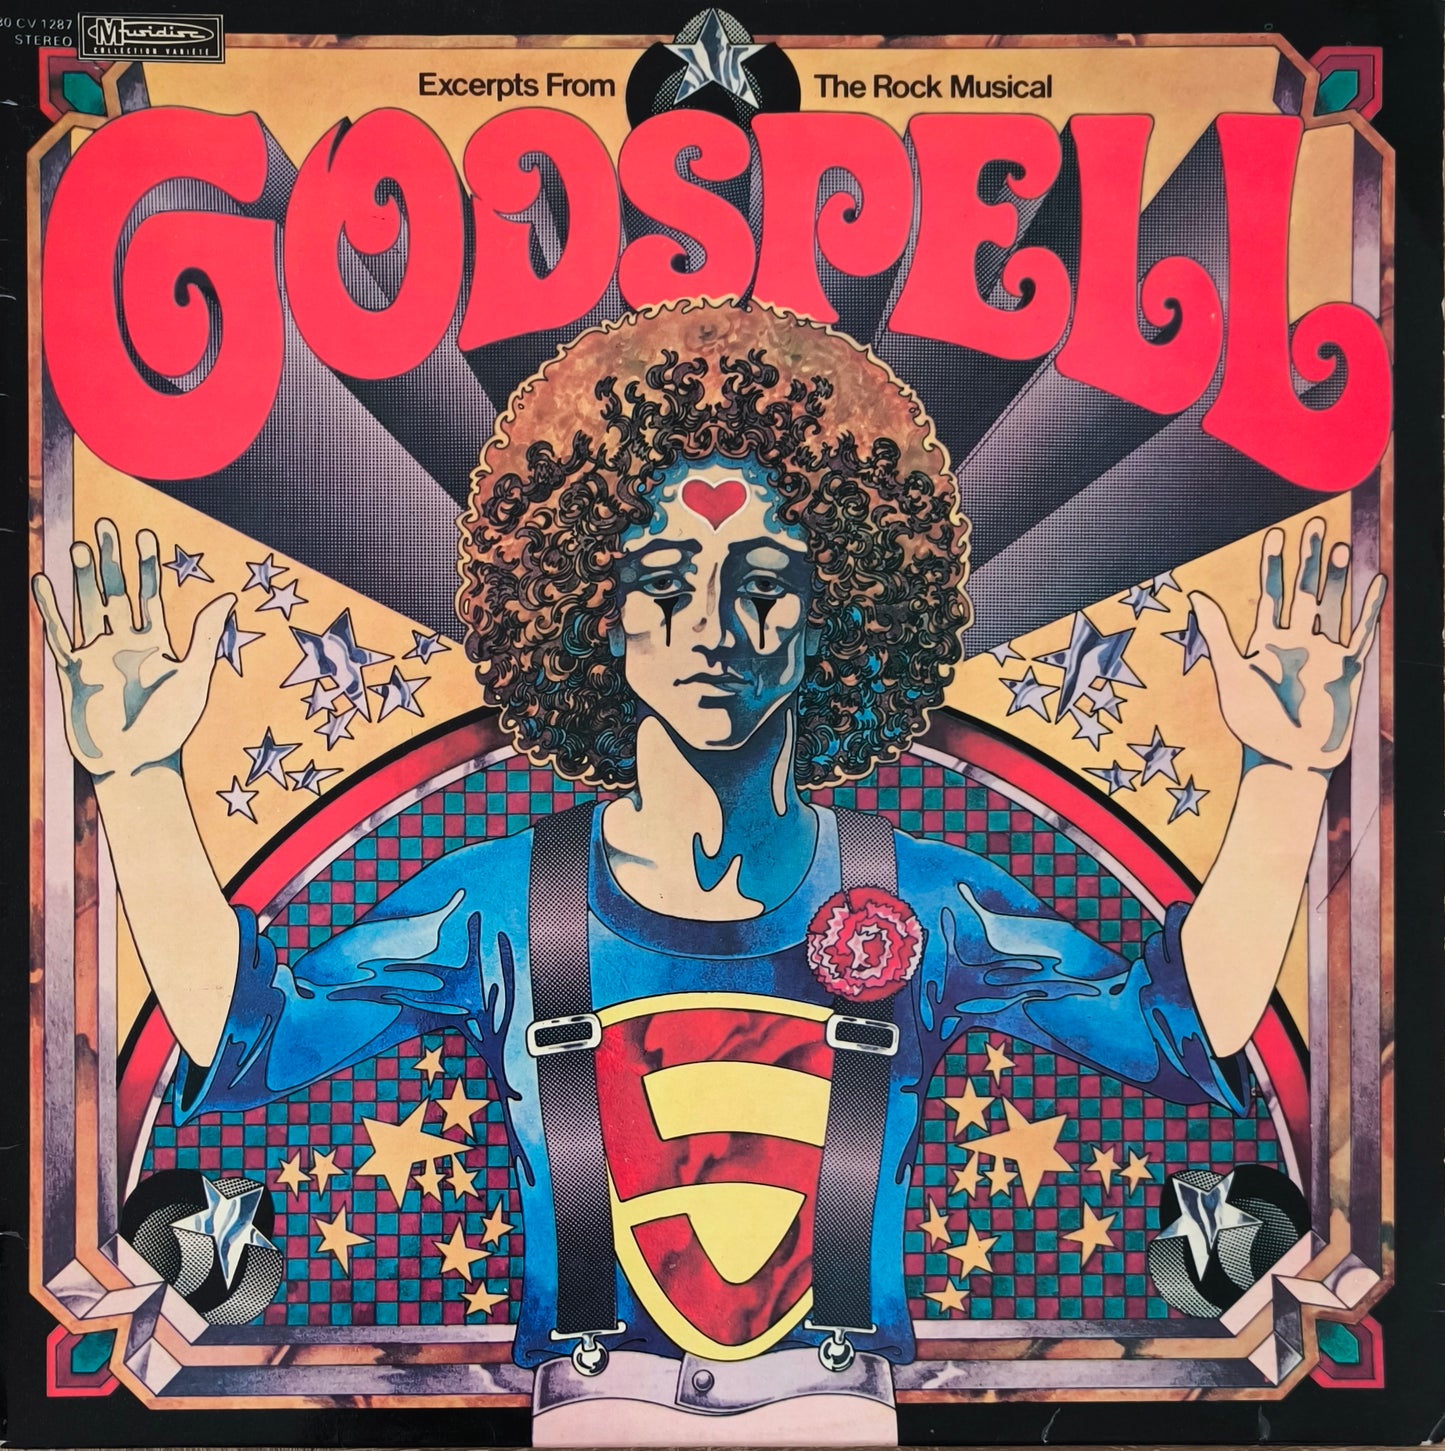 BRUCE BAXTER ORCHESTRA  AND CHORUS - Excerpts From The Rock Musical "Godspell"